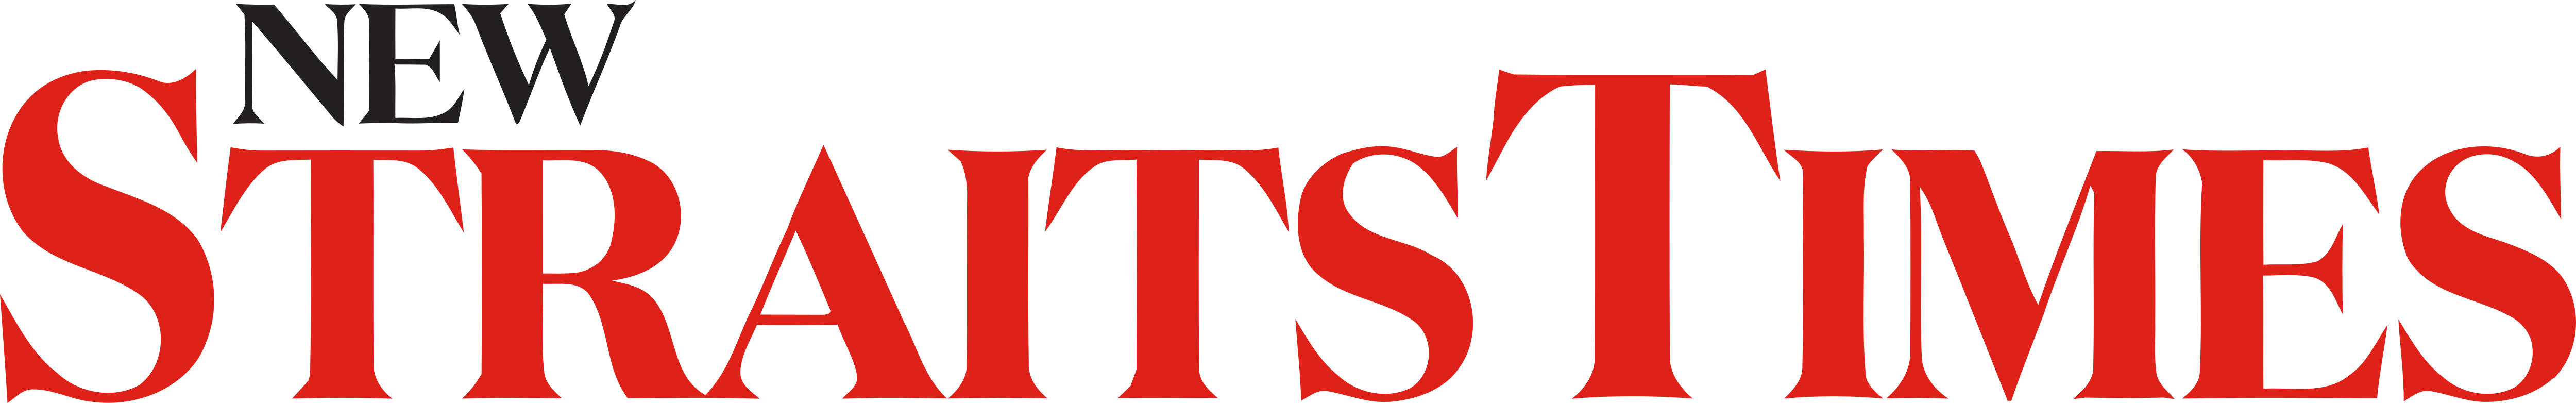 New Straits Times Logos Download